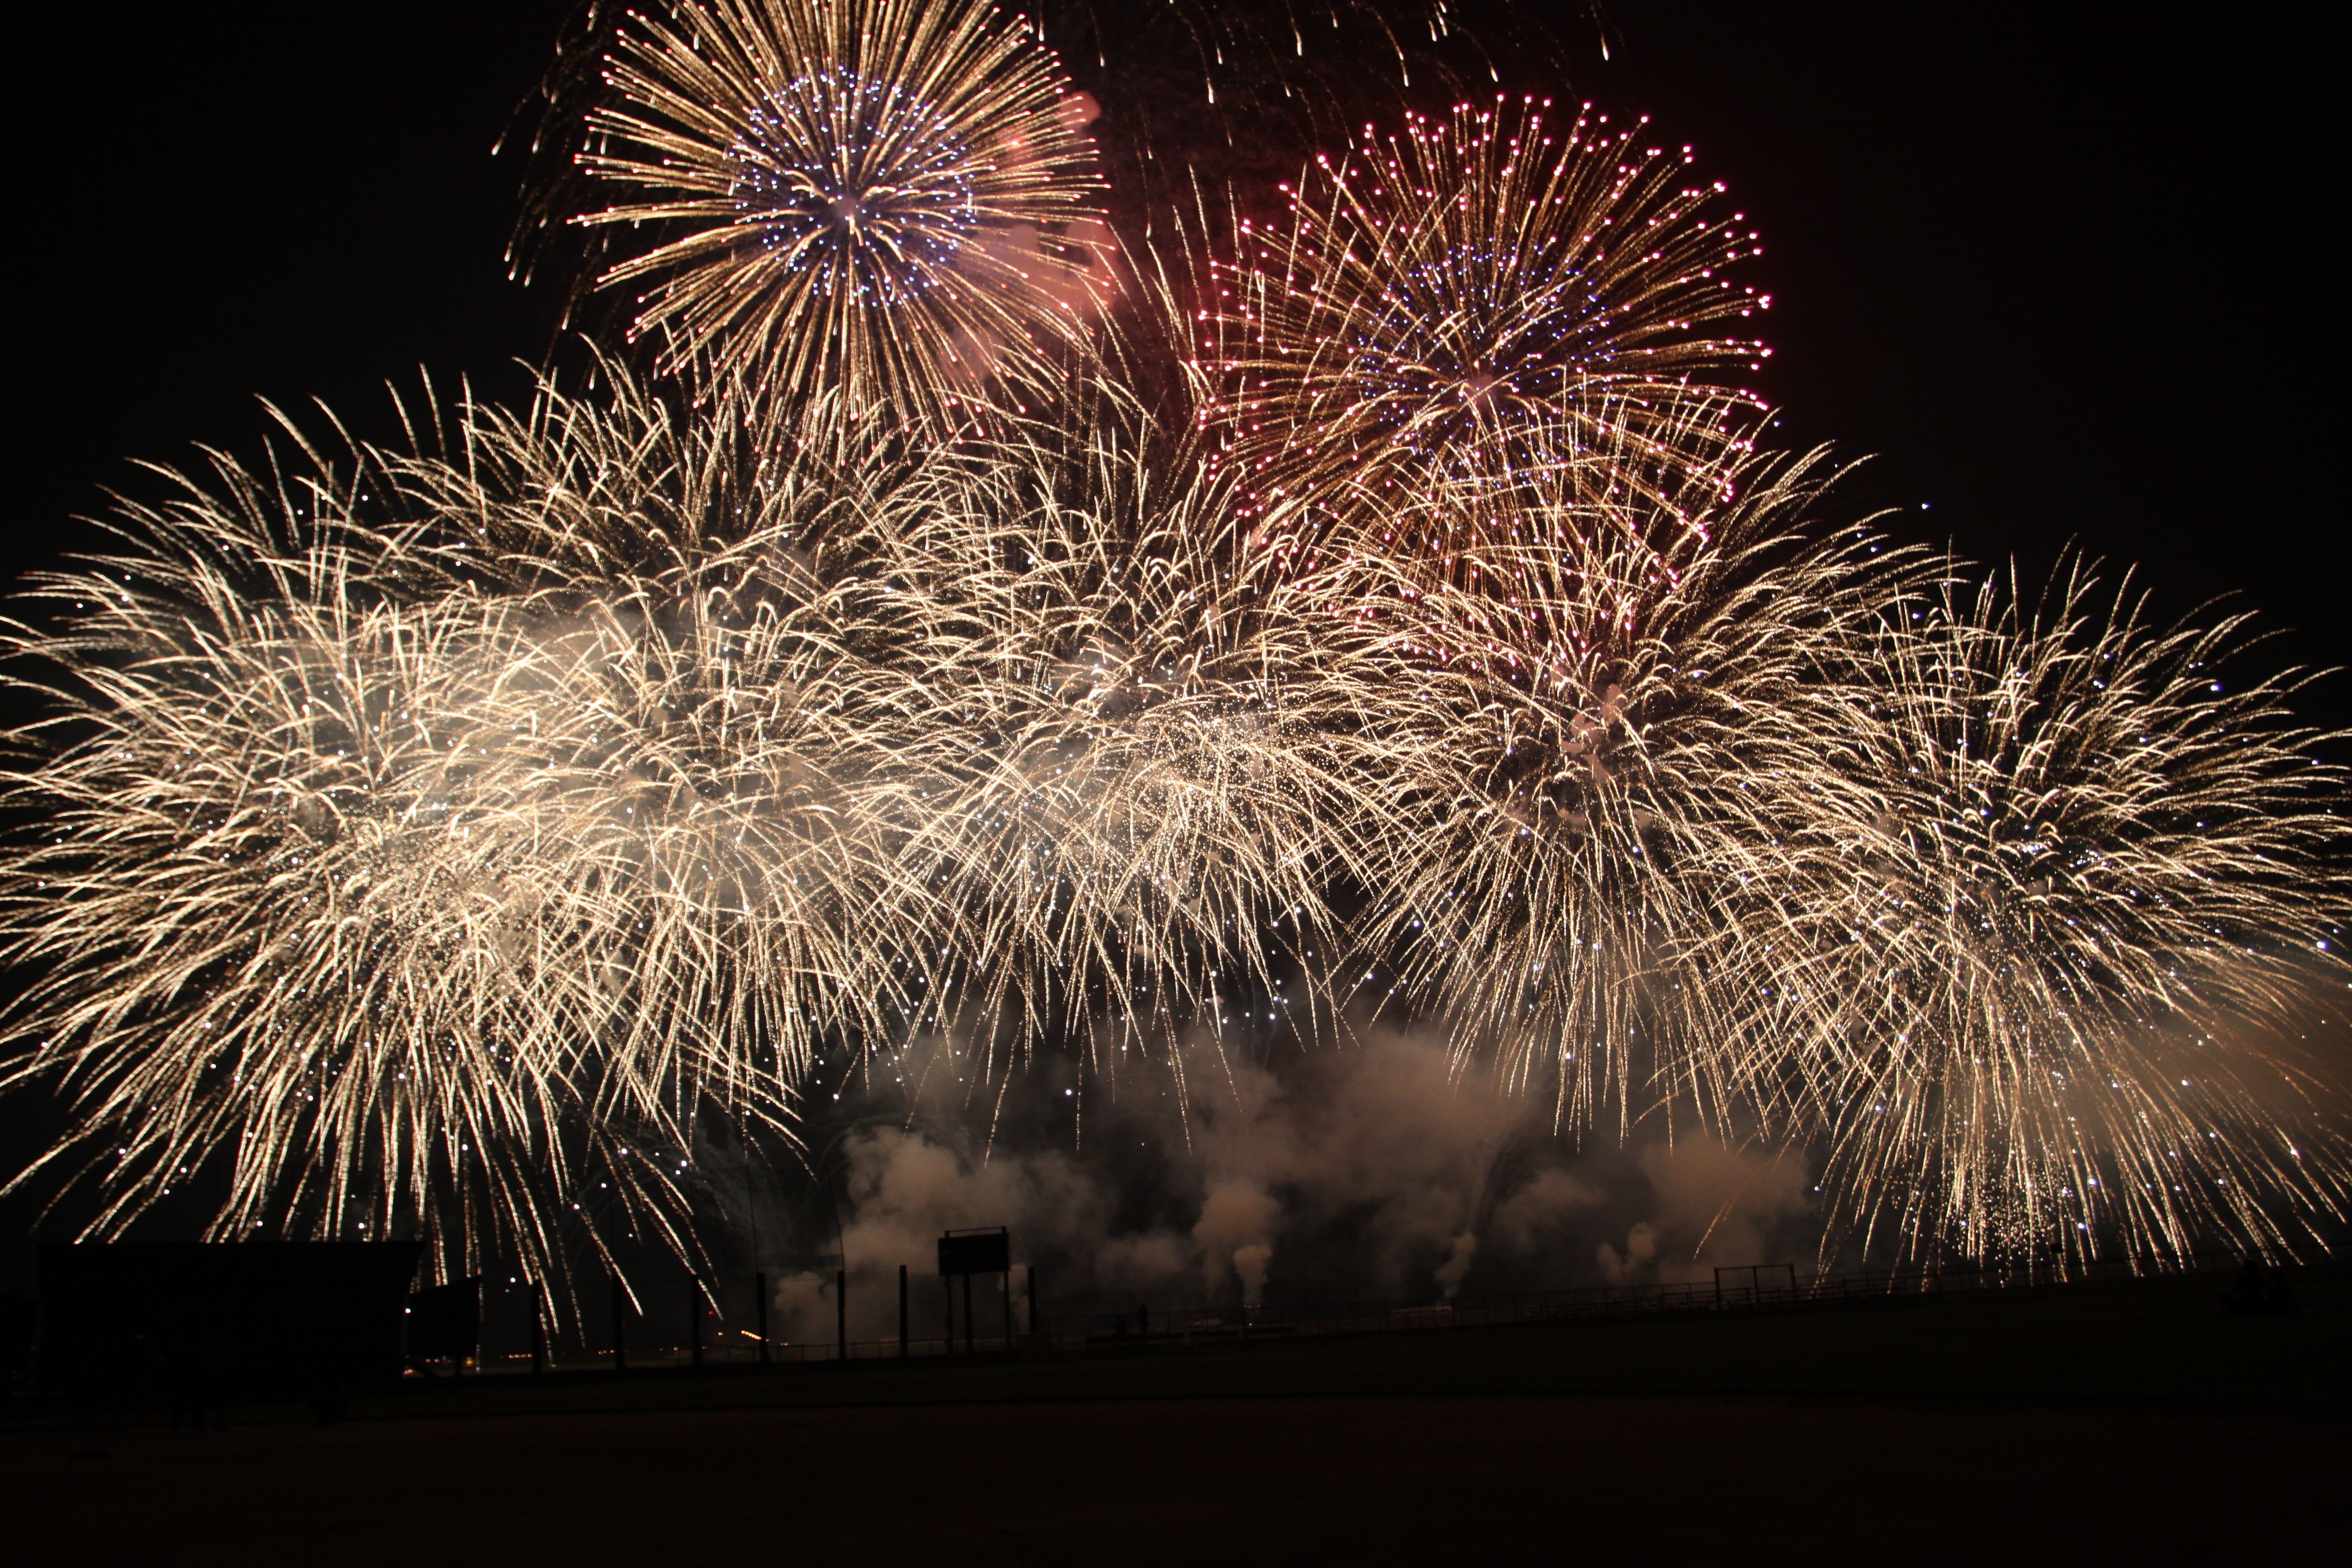 Fireworks in the Sky image - Free stock photo - Public Domain photo ...